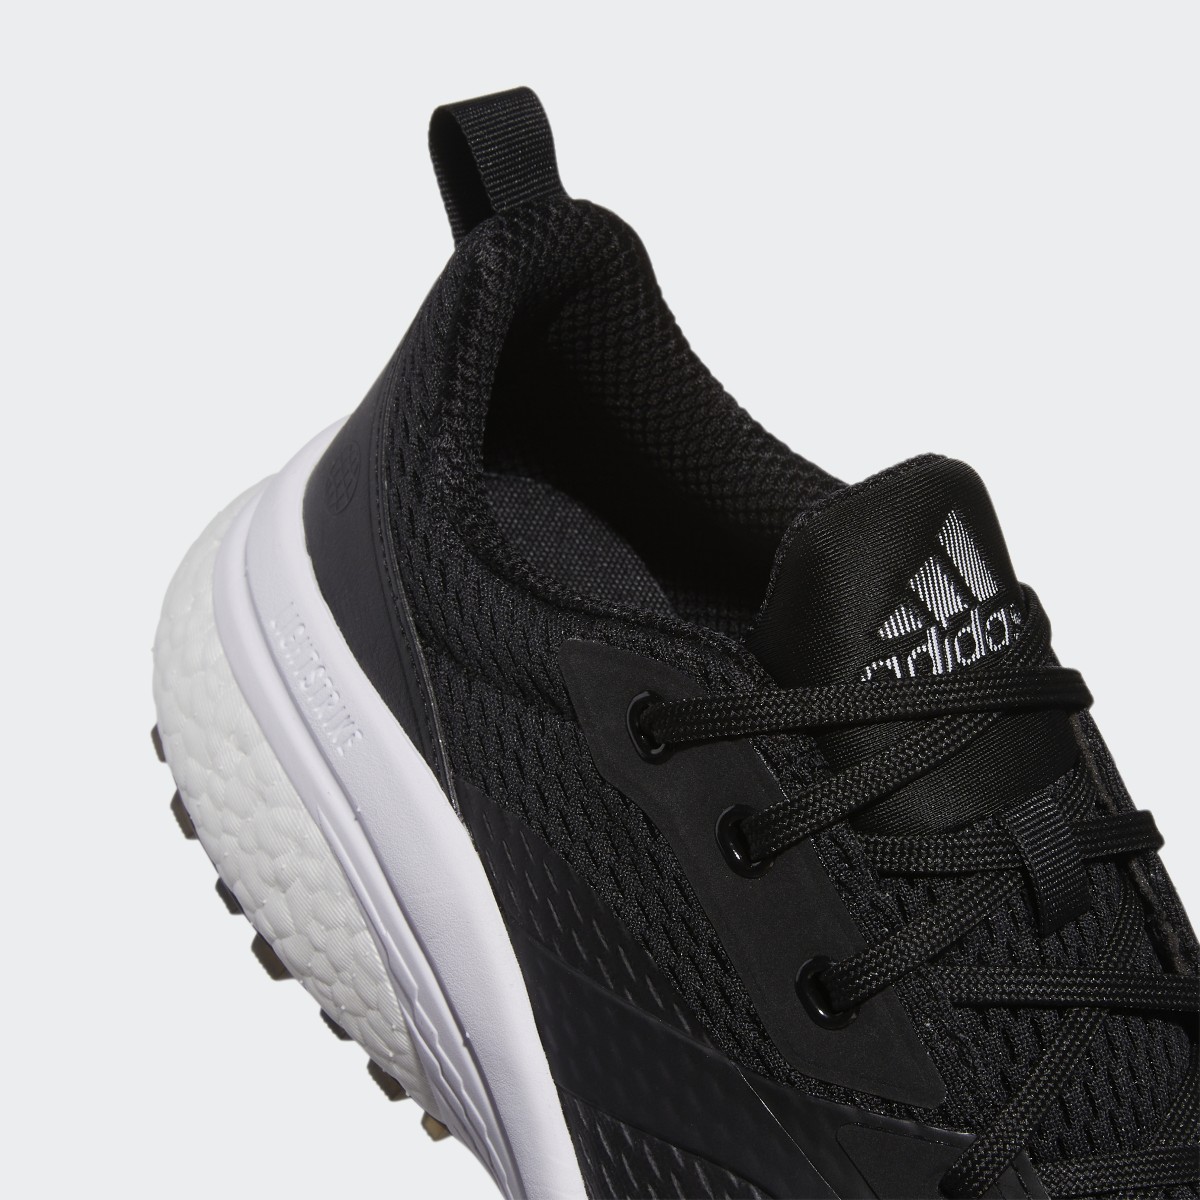 Adidas Solarmotion Spikeless Shoes. 9